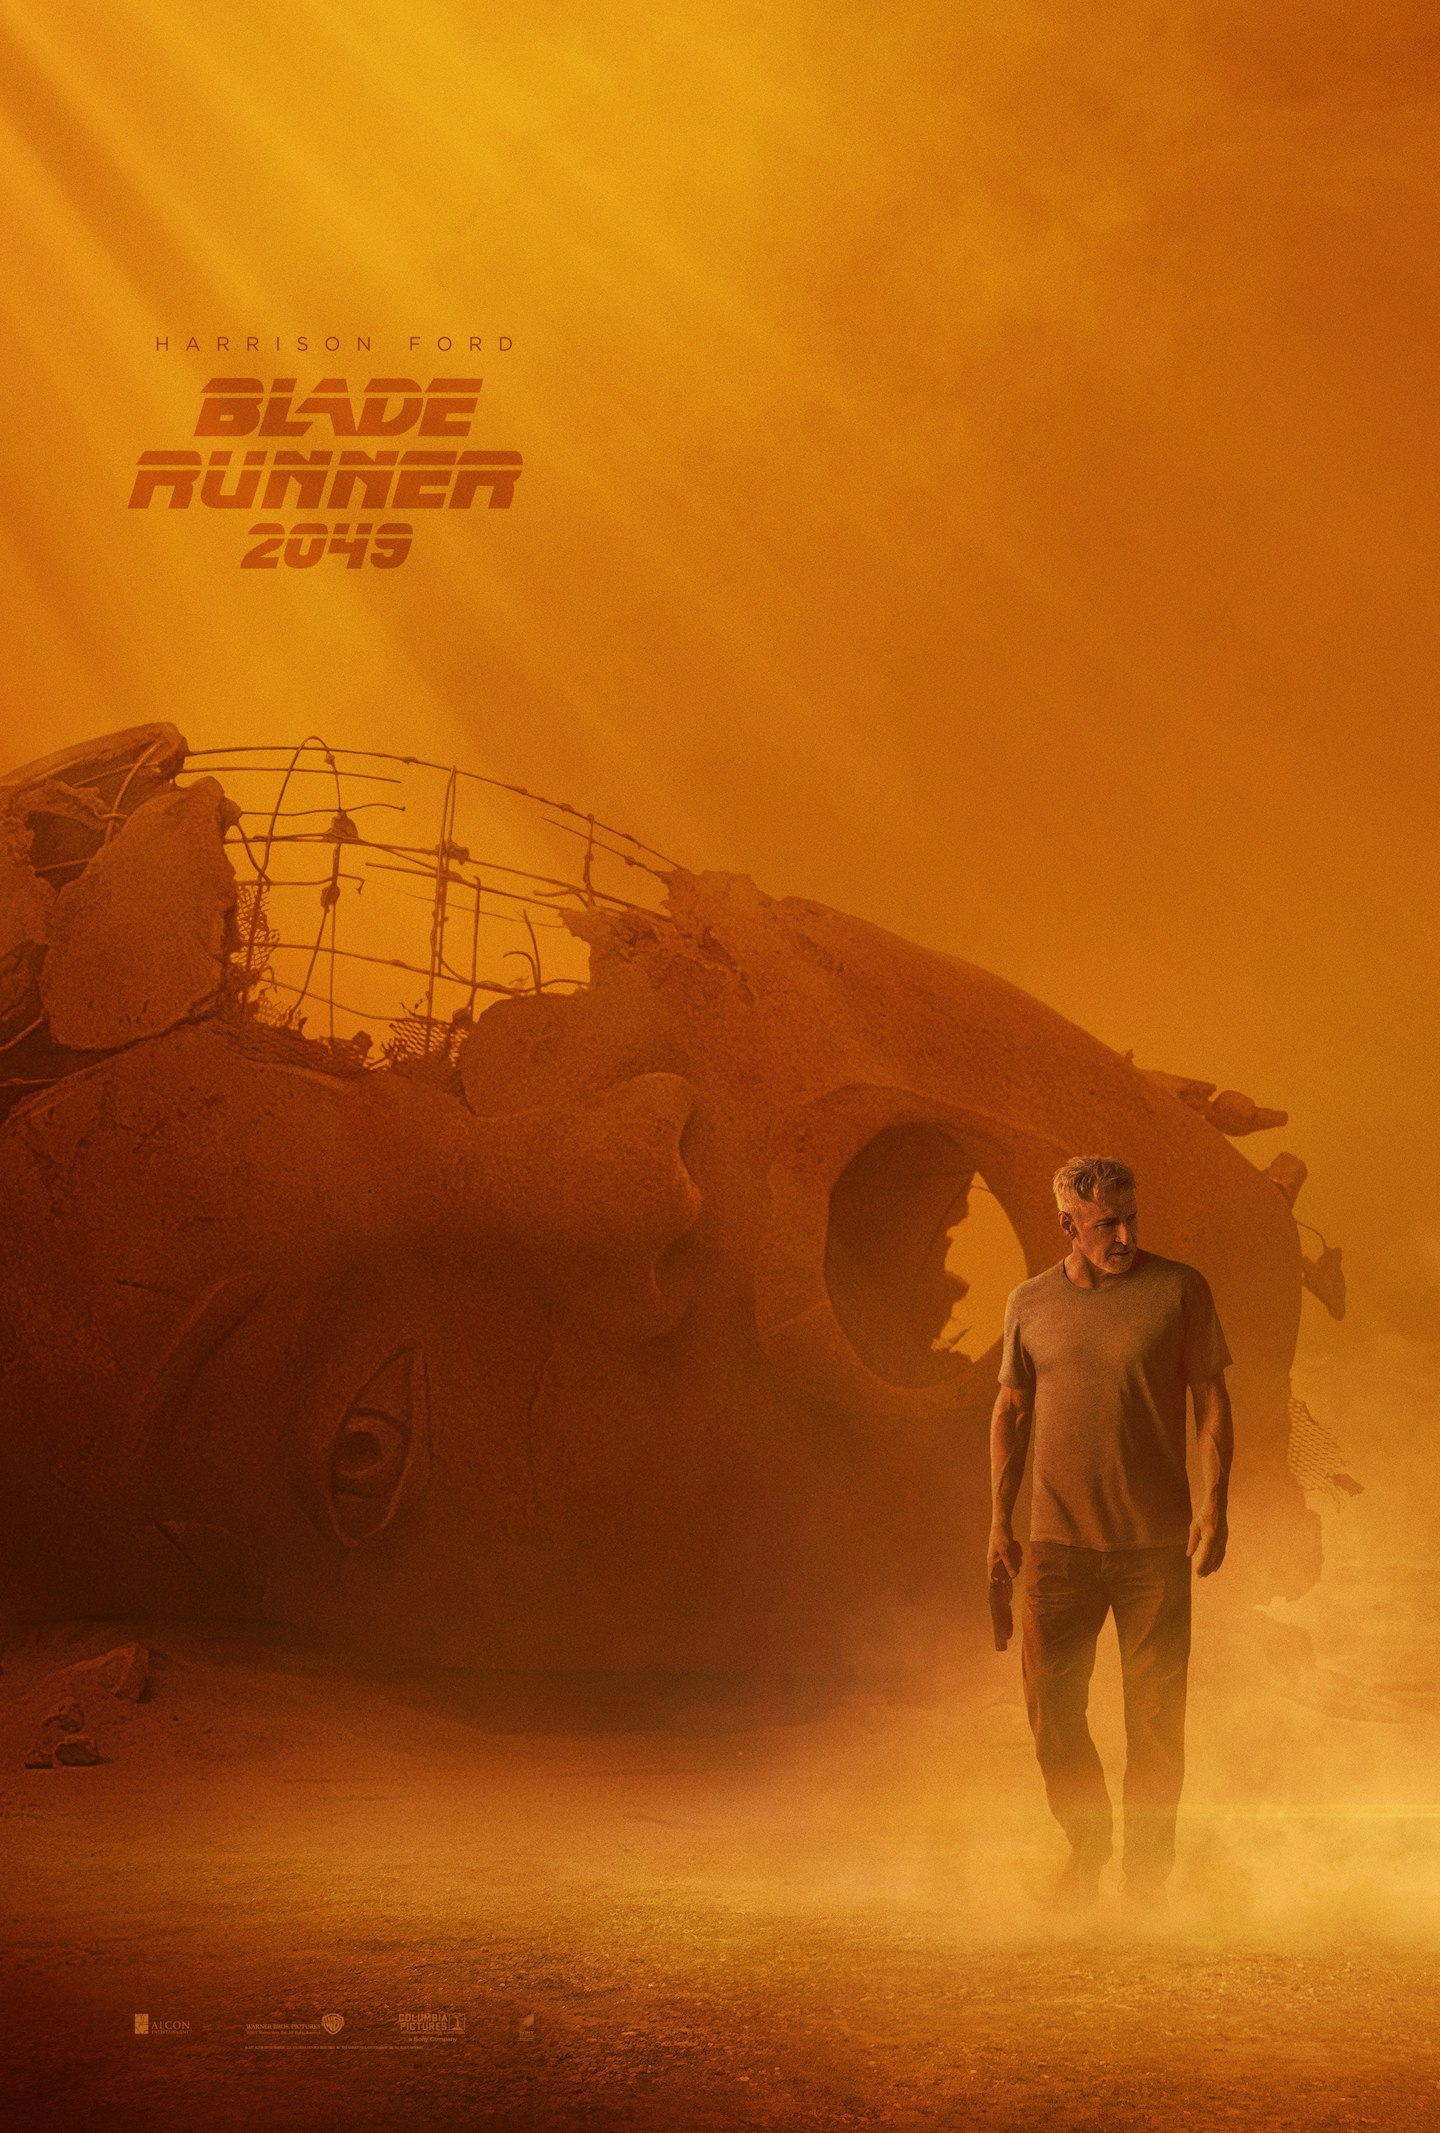 Blade Runner 2049 character posters